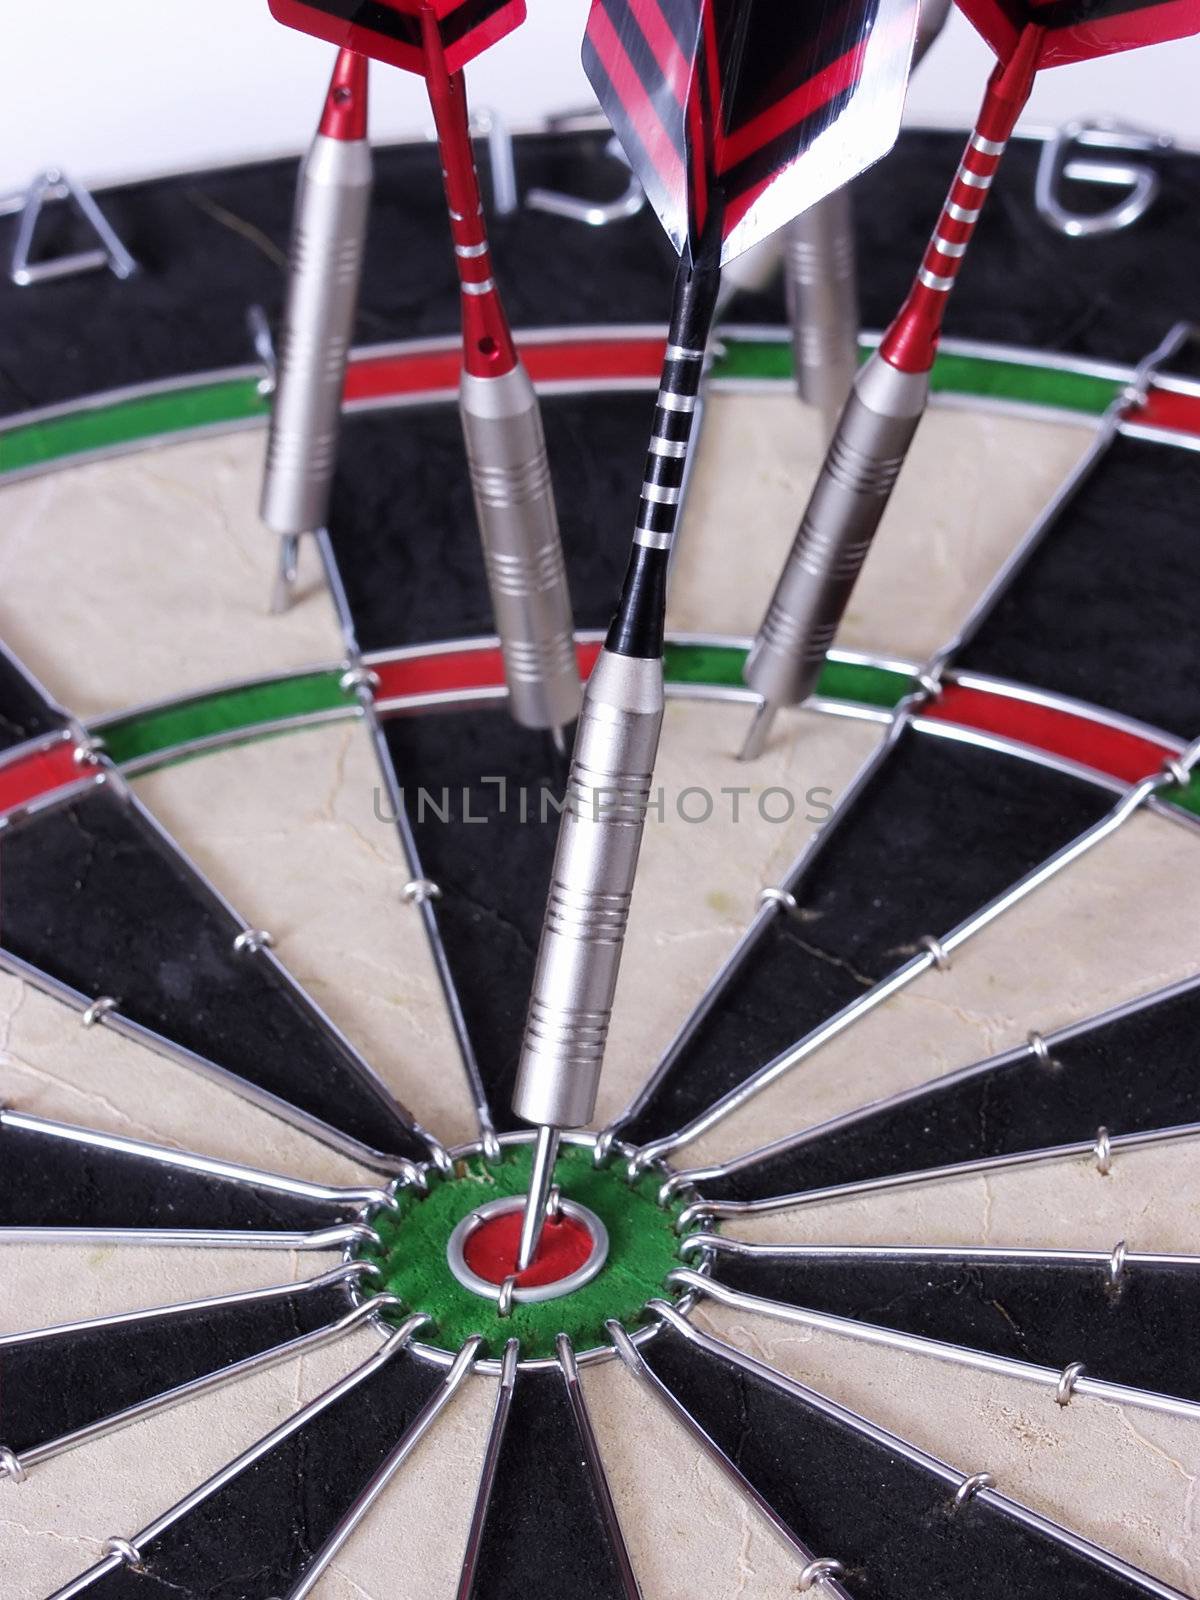 A close-up of steel tipped darts in a dartboard, one with a bullseye